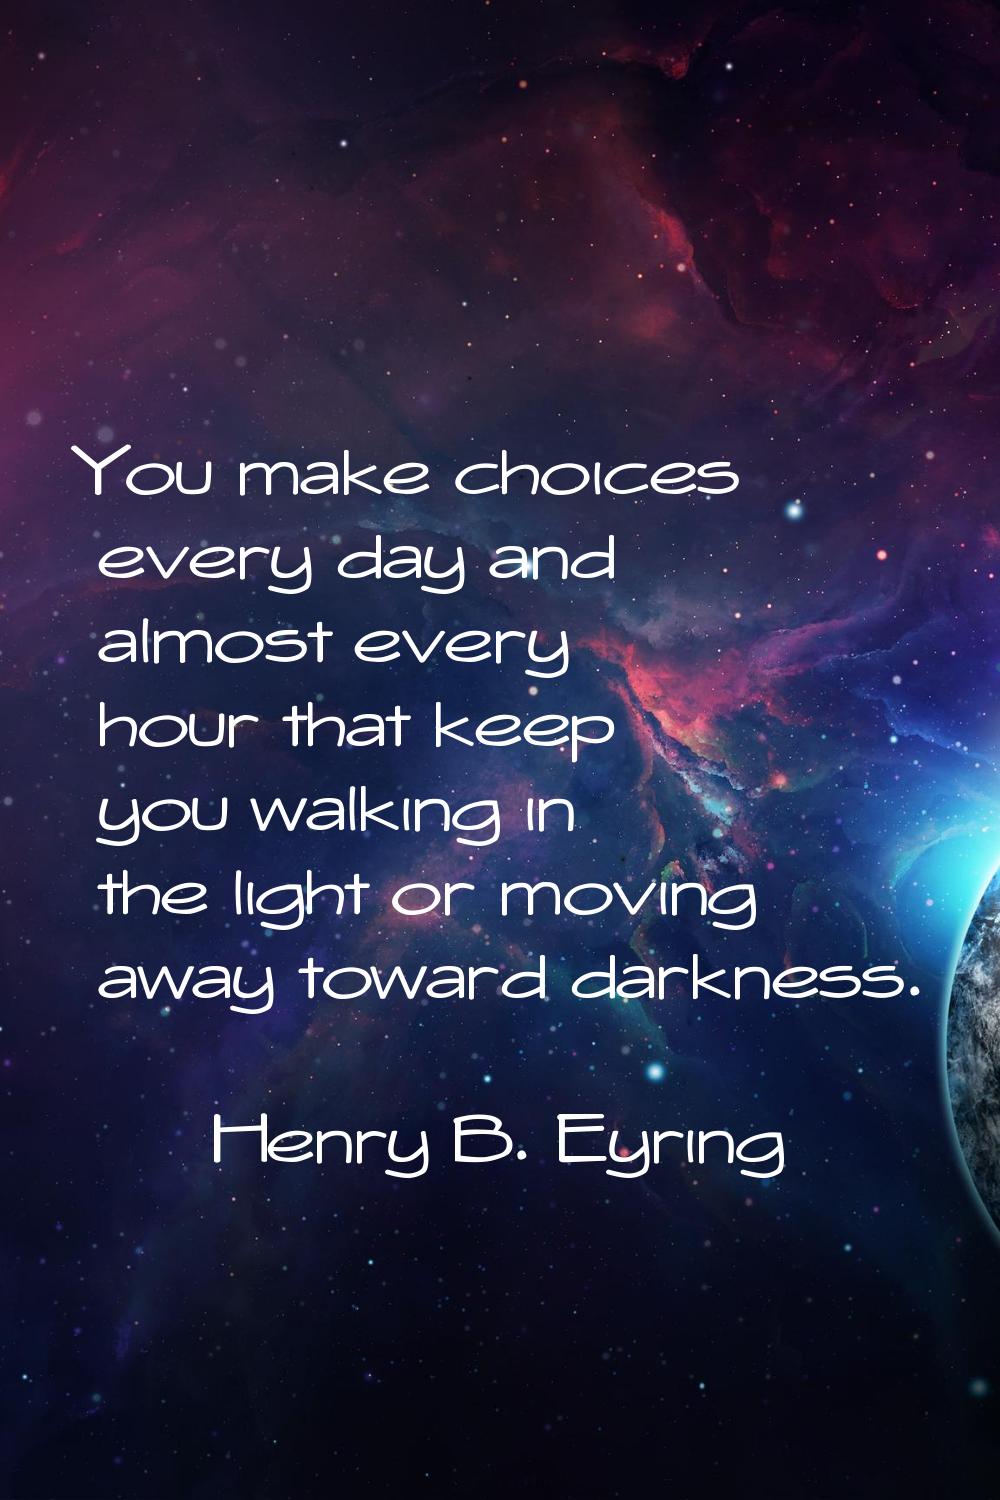 You make choices every day and almost every hour that keep you walking in the light or moving away 